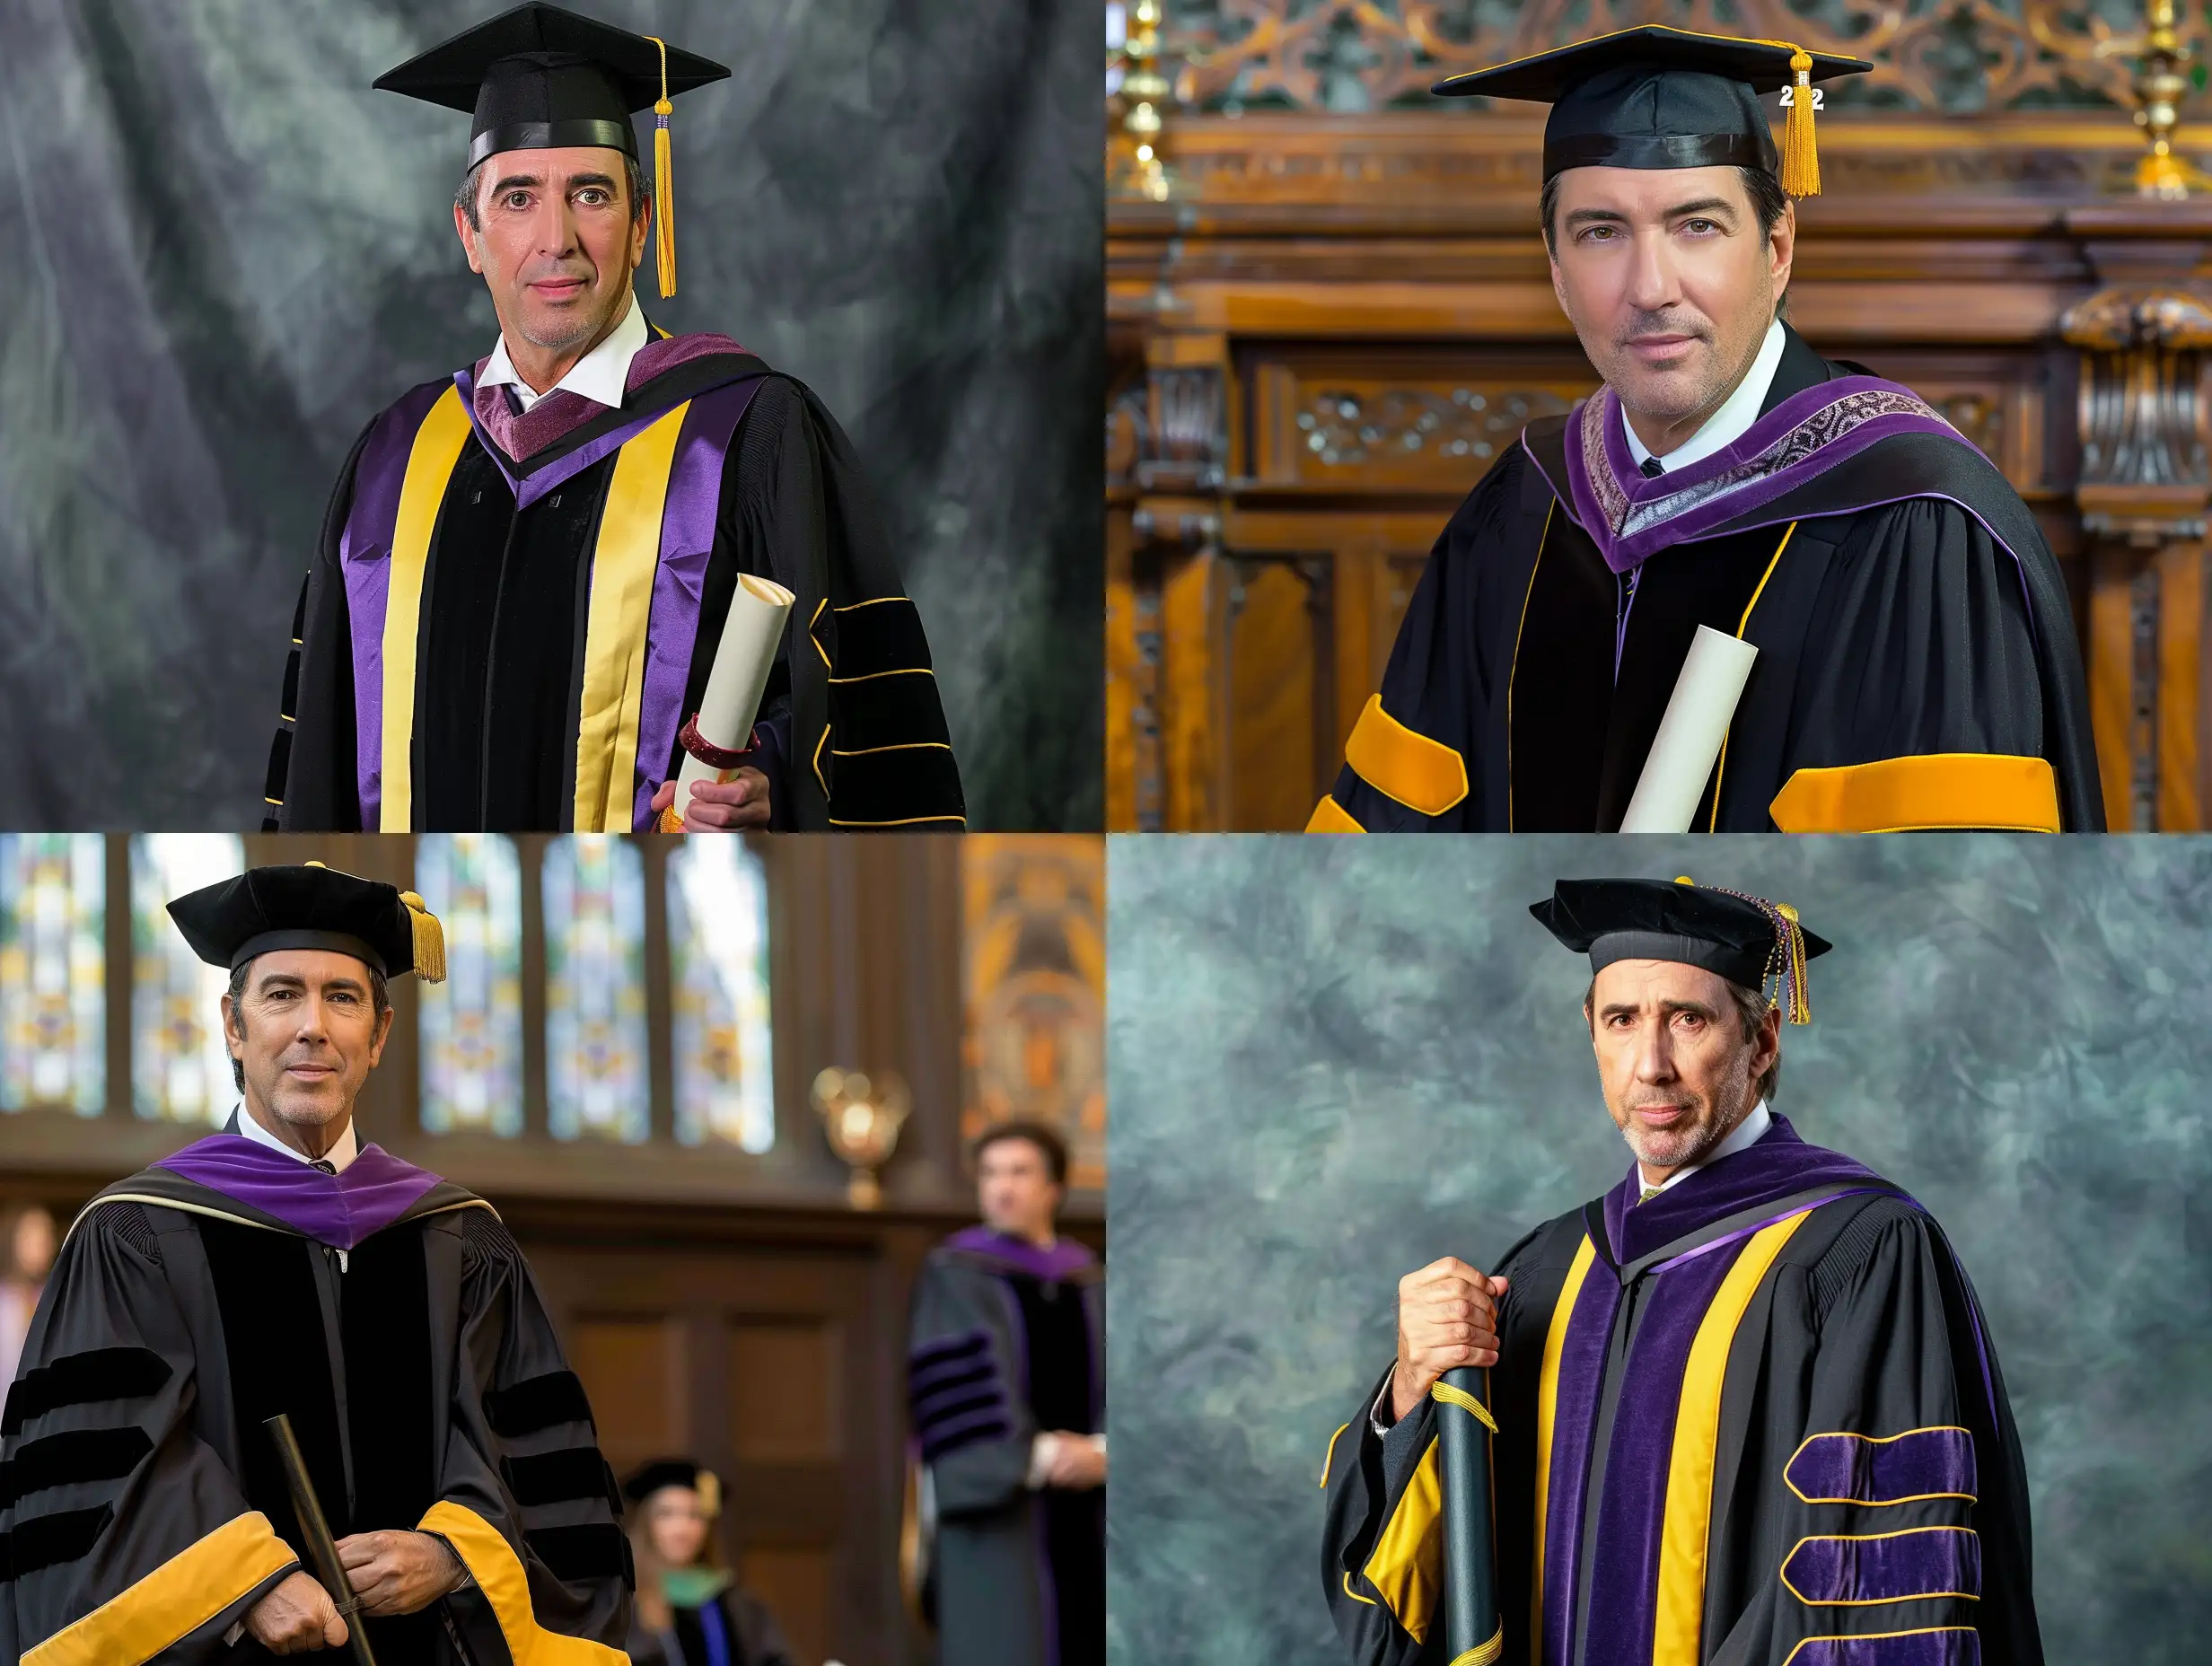 Nicolas Cage in a university graduation photo, wearing a mortarboard cap, holding a scroll, black robes with purple and yellow trim.